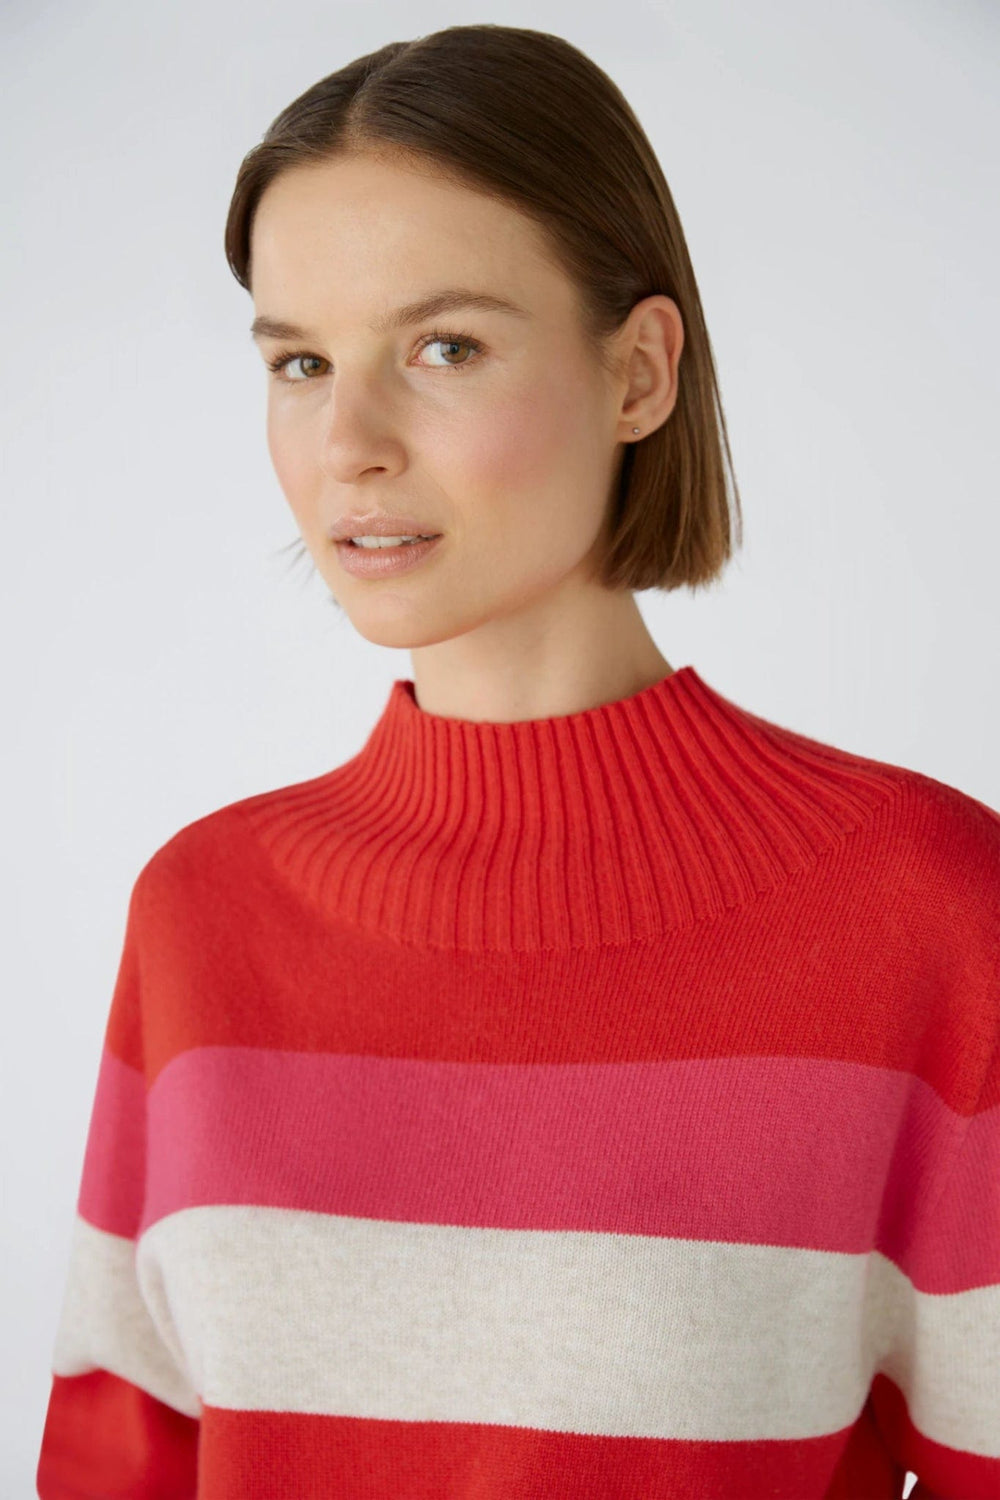 Oui Stripped Knitted Jumper In Red Rose - Crabtree Cottage